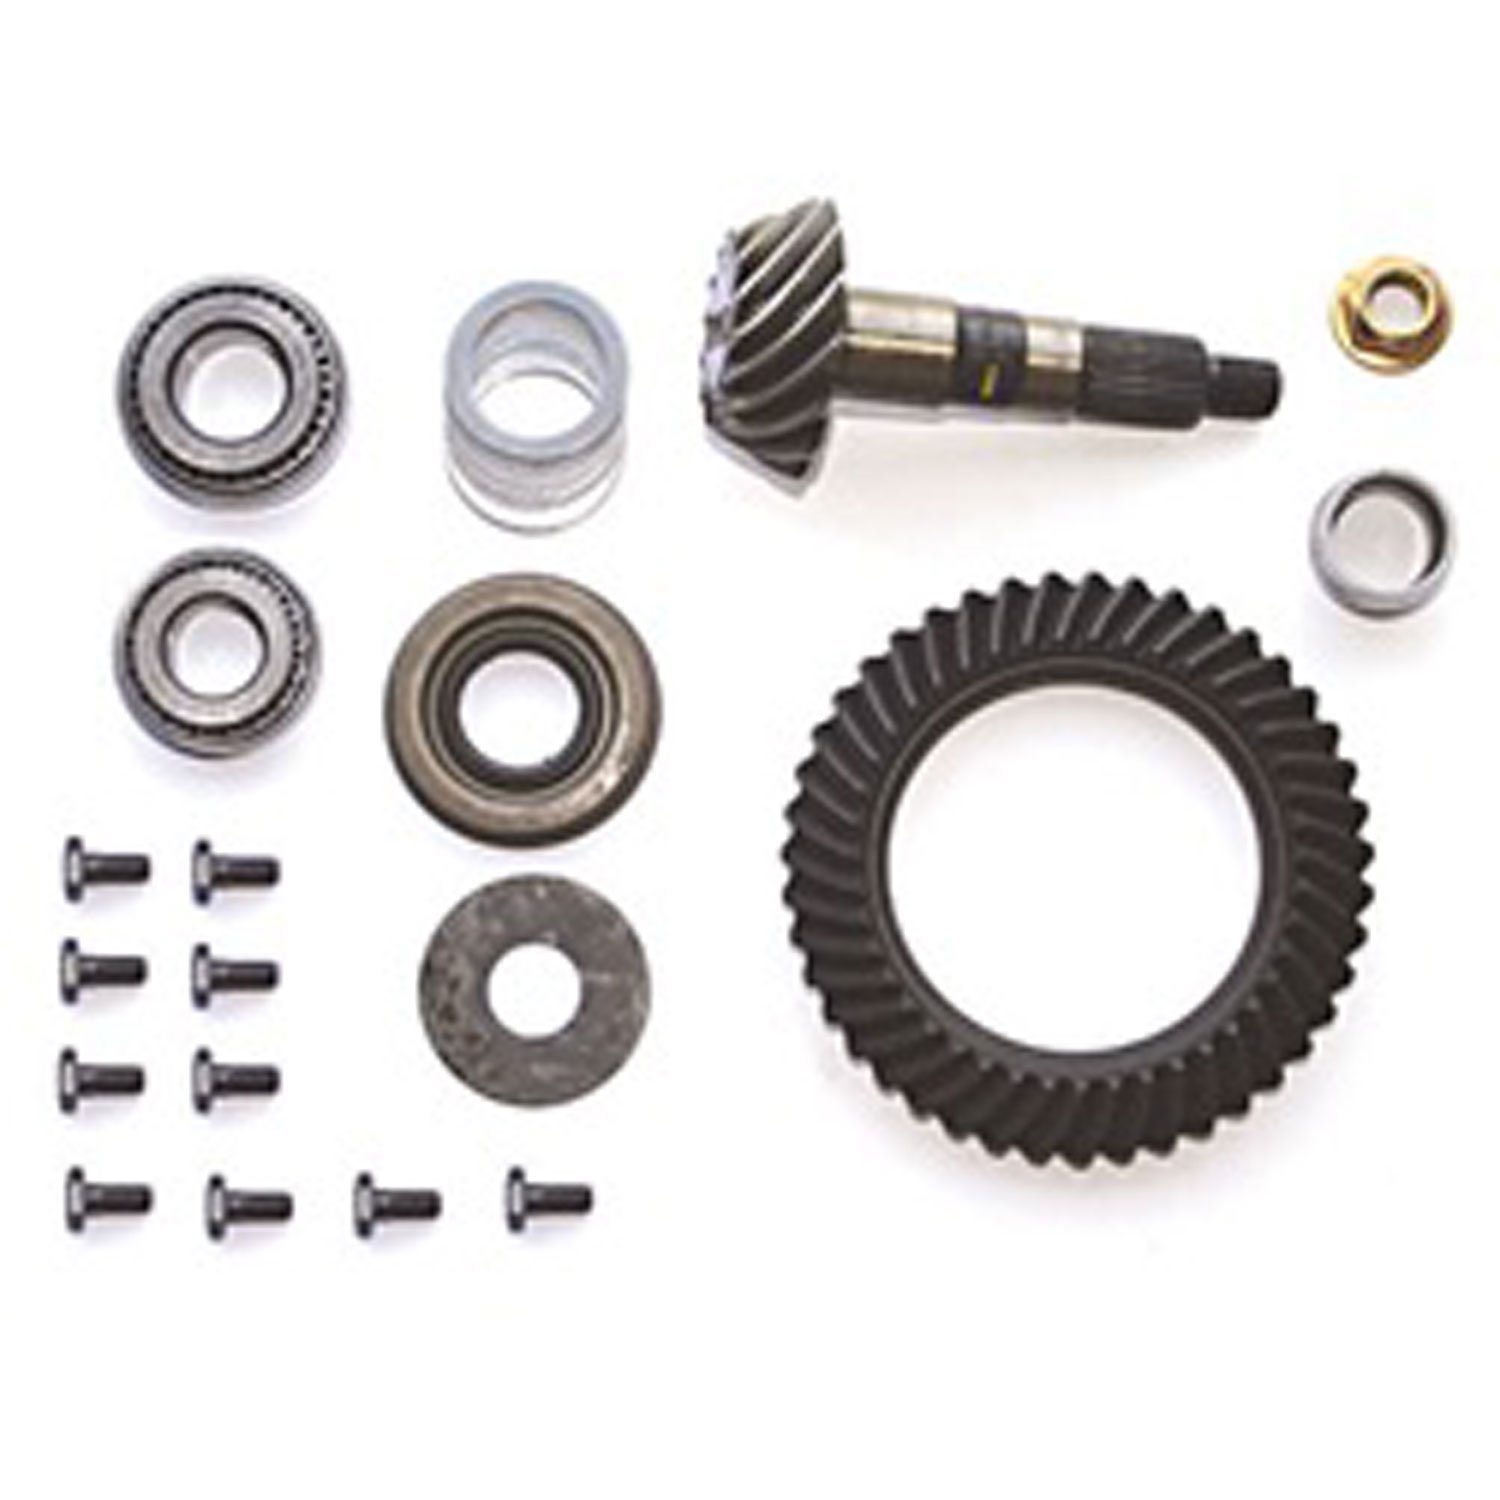 Ring and Pinion Kit for Dana 30 3.55